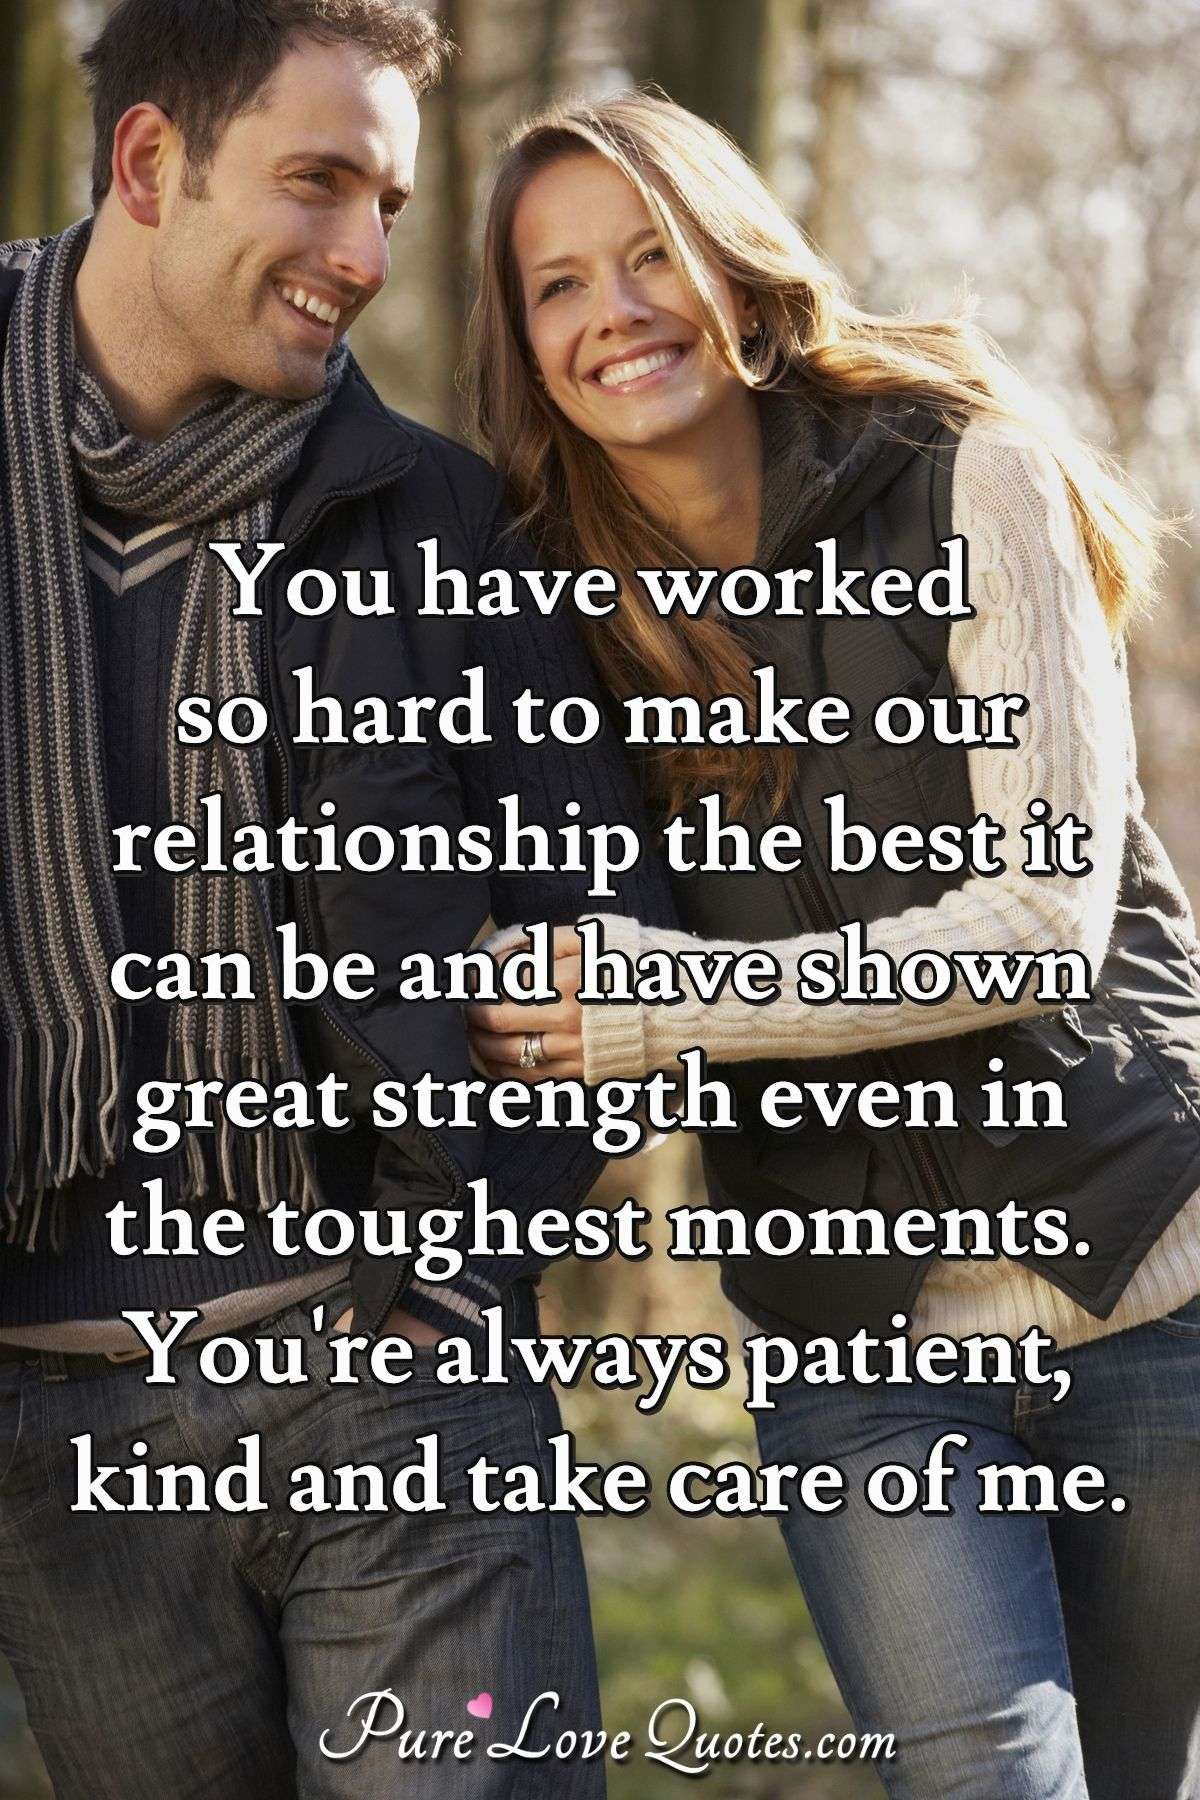 You have worked so hard to make our relationship the best it can be and have shown great strength even in the toughest moments. You're always patient, kind and take care of me. - Anonymous